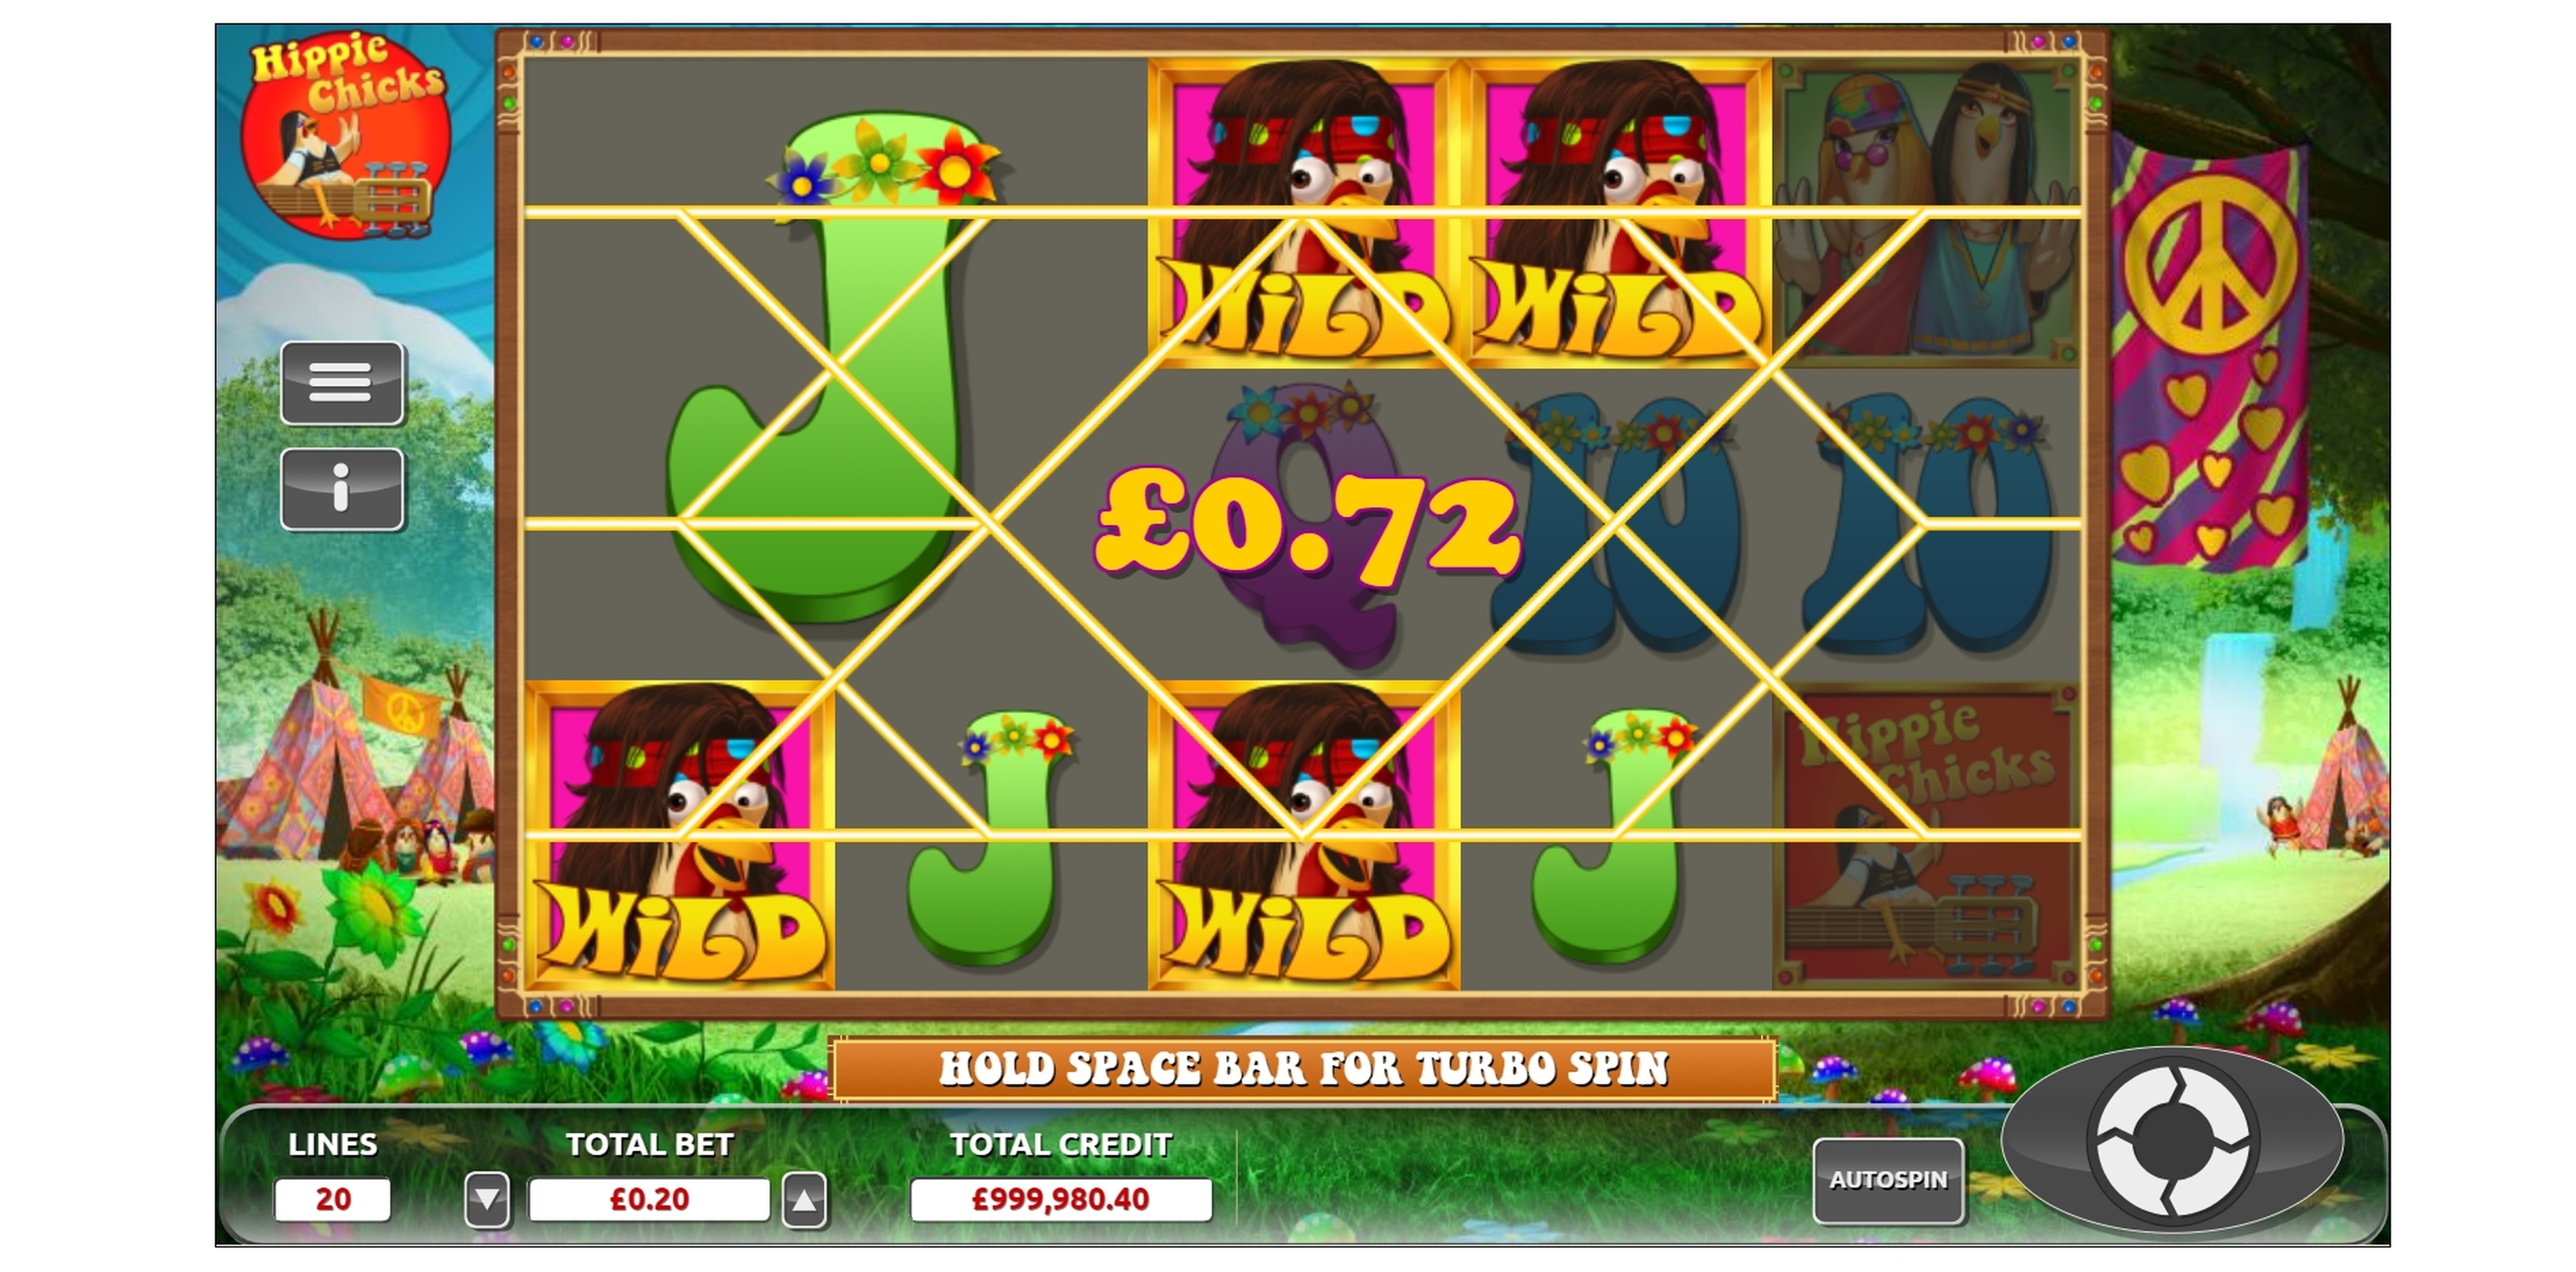 Win Money in Hippie Chicks Free Slot Game by The Games Company